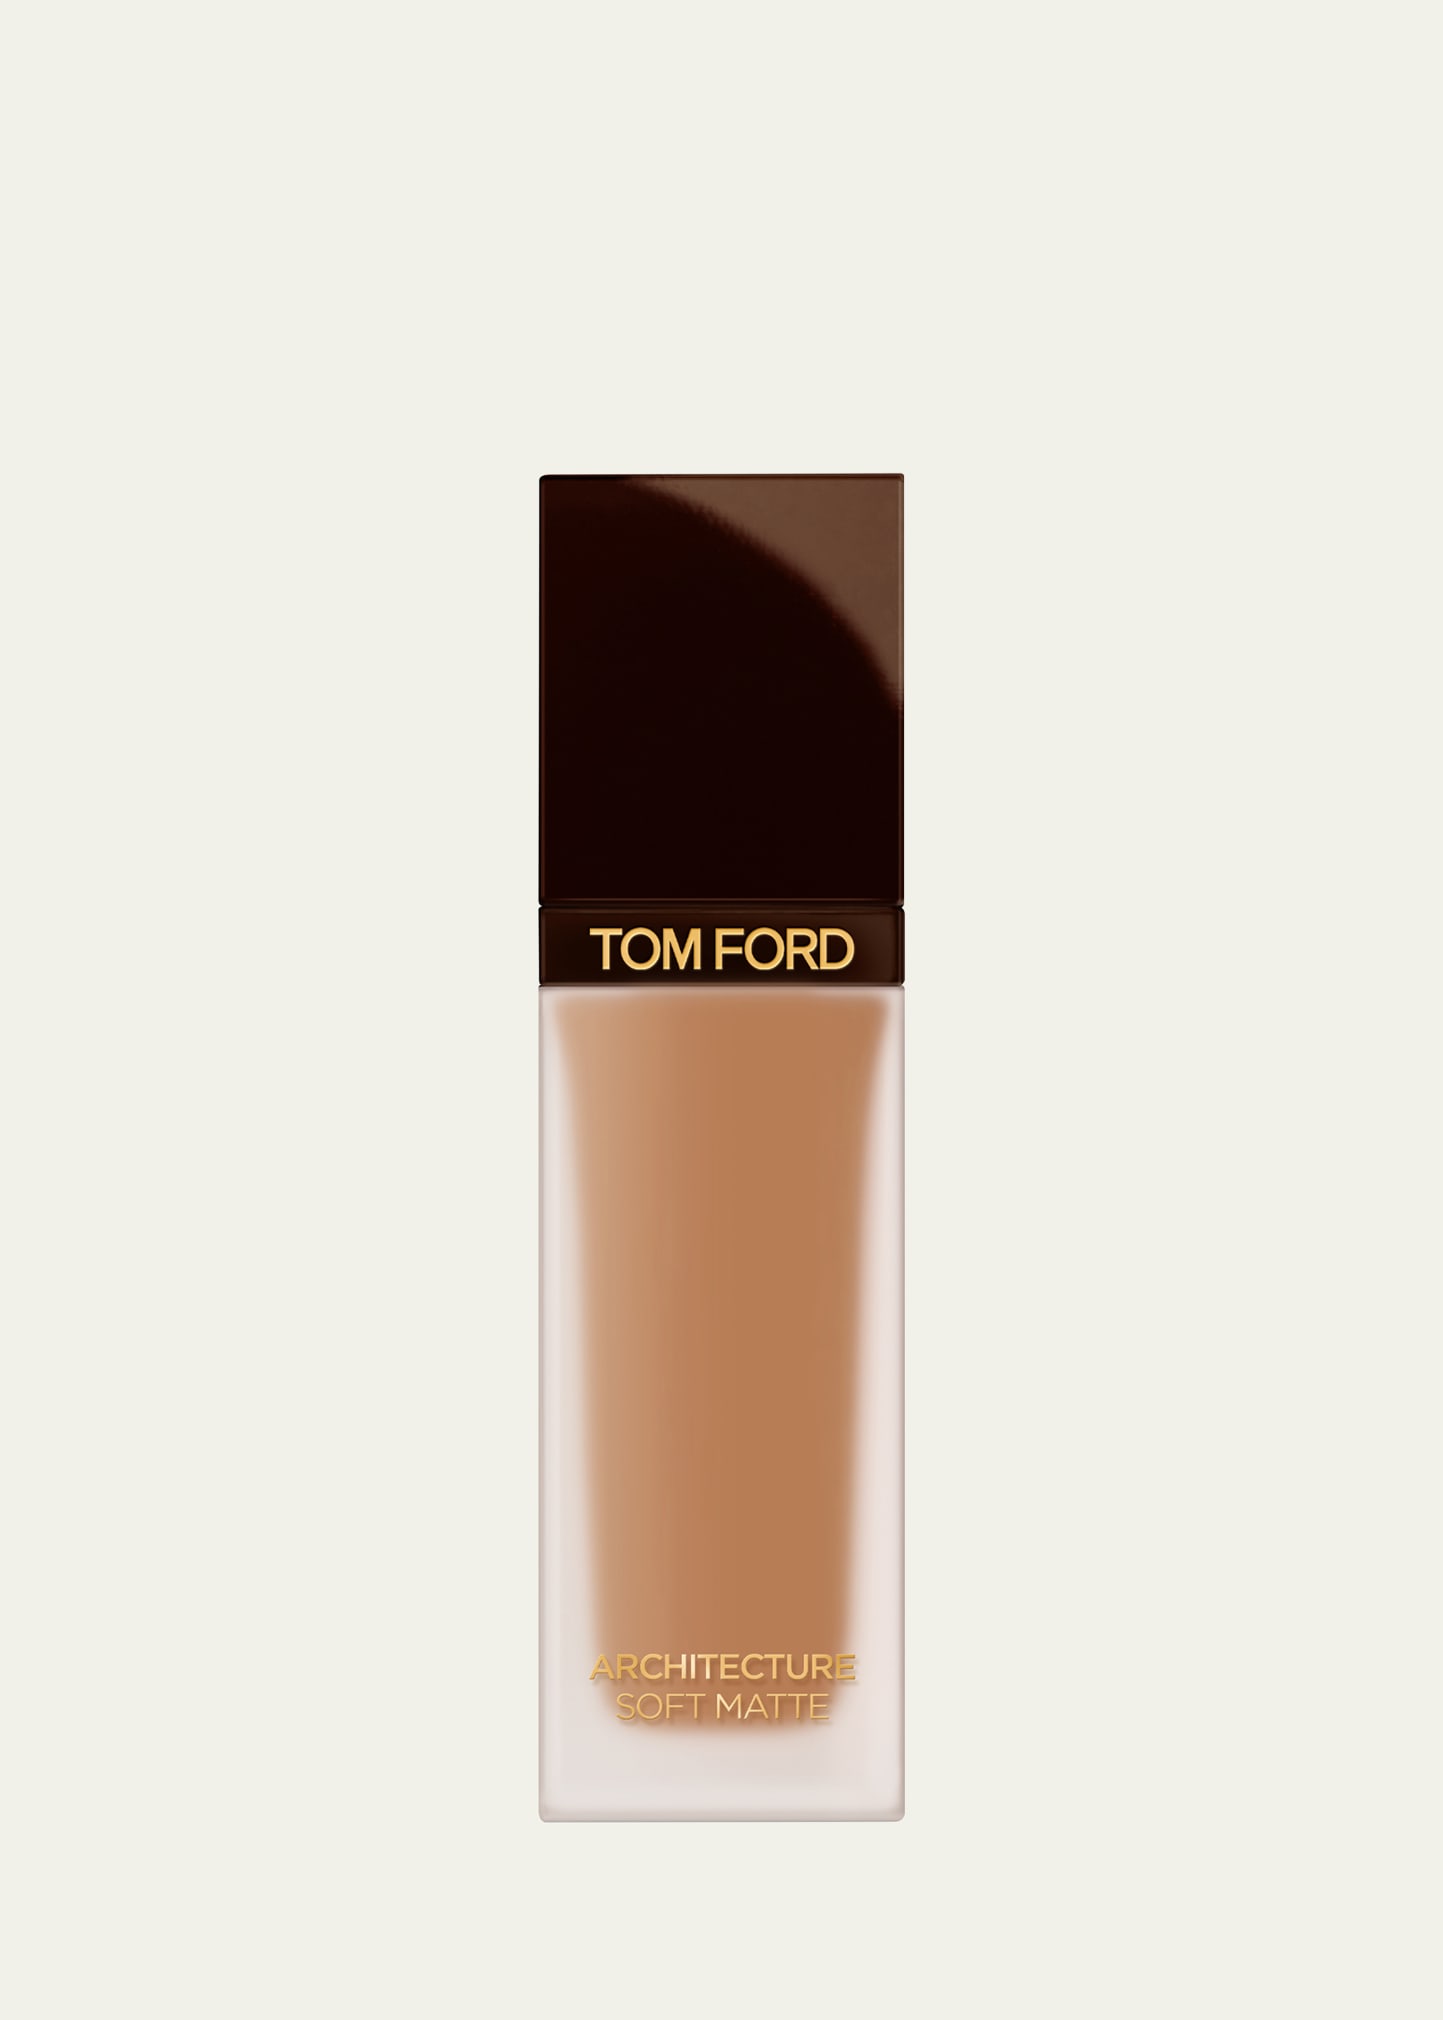 Tom Ford Architecture Soft Matte Foundation In Asm - 8.2 Warm Ho